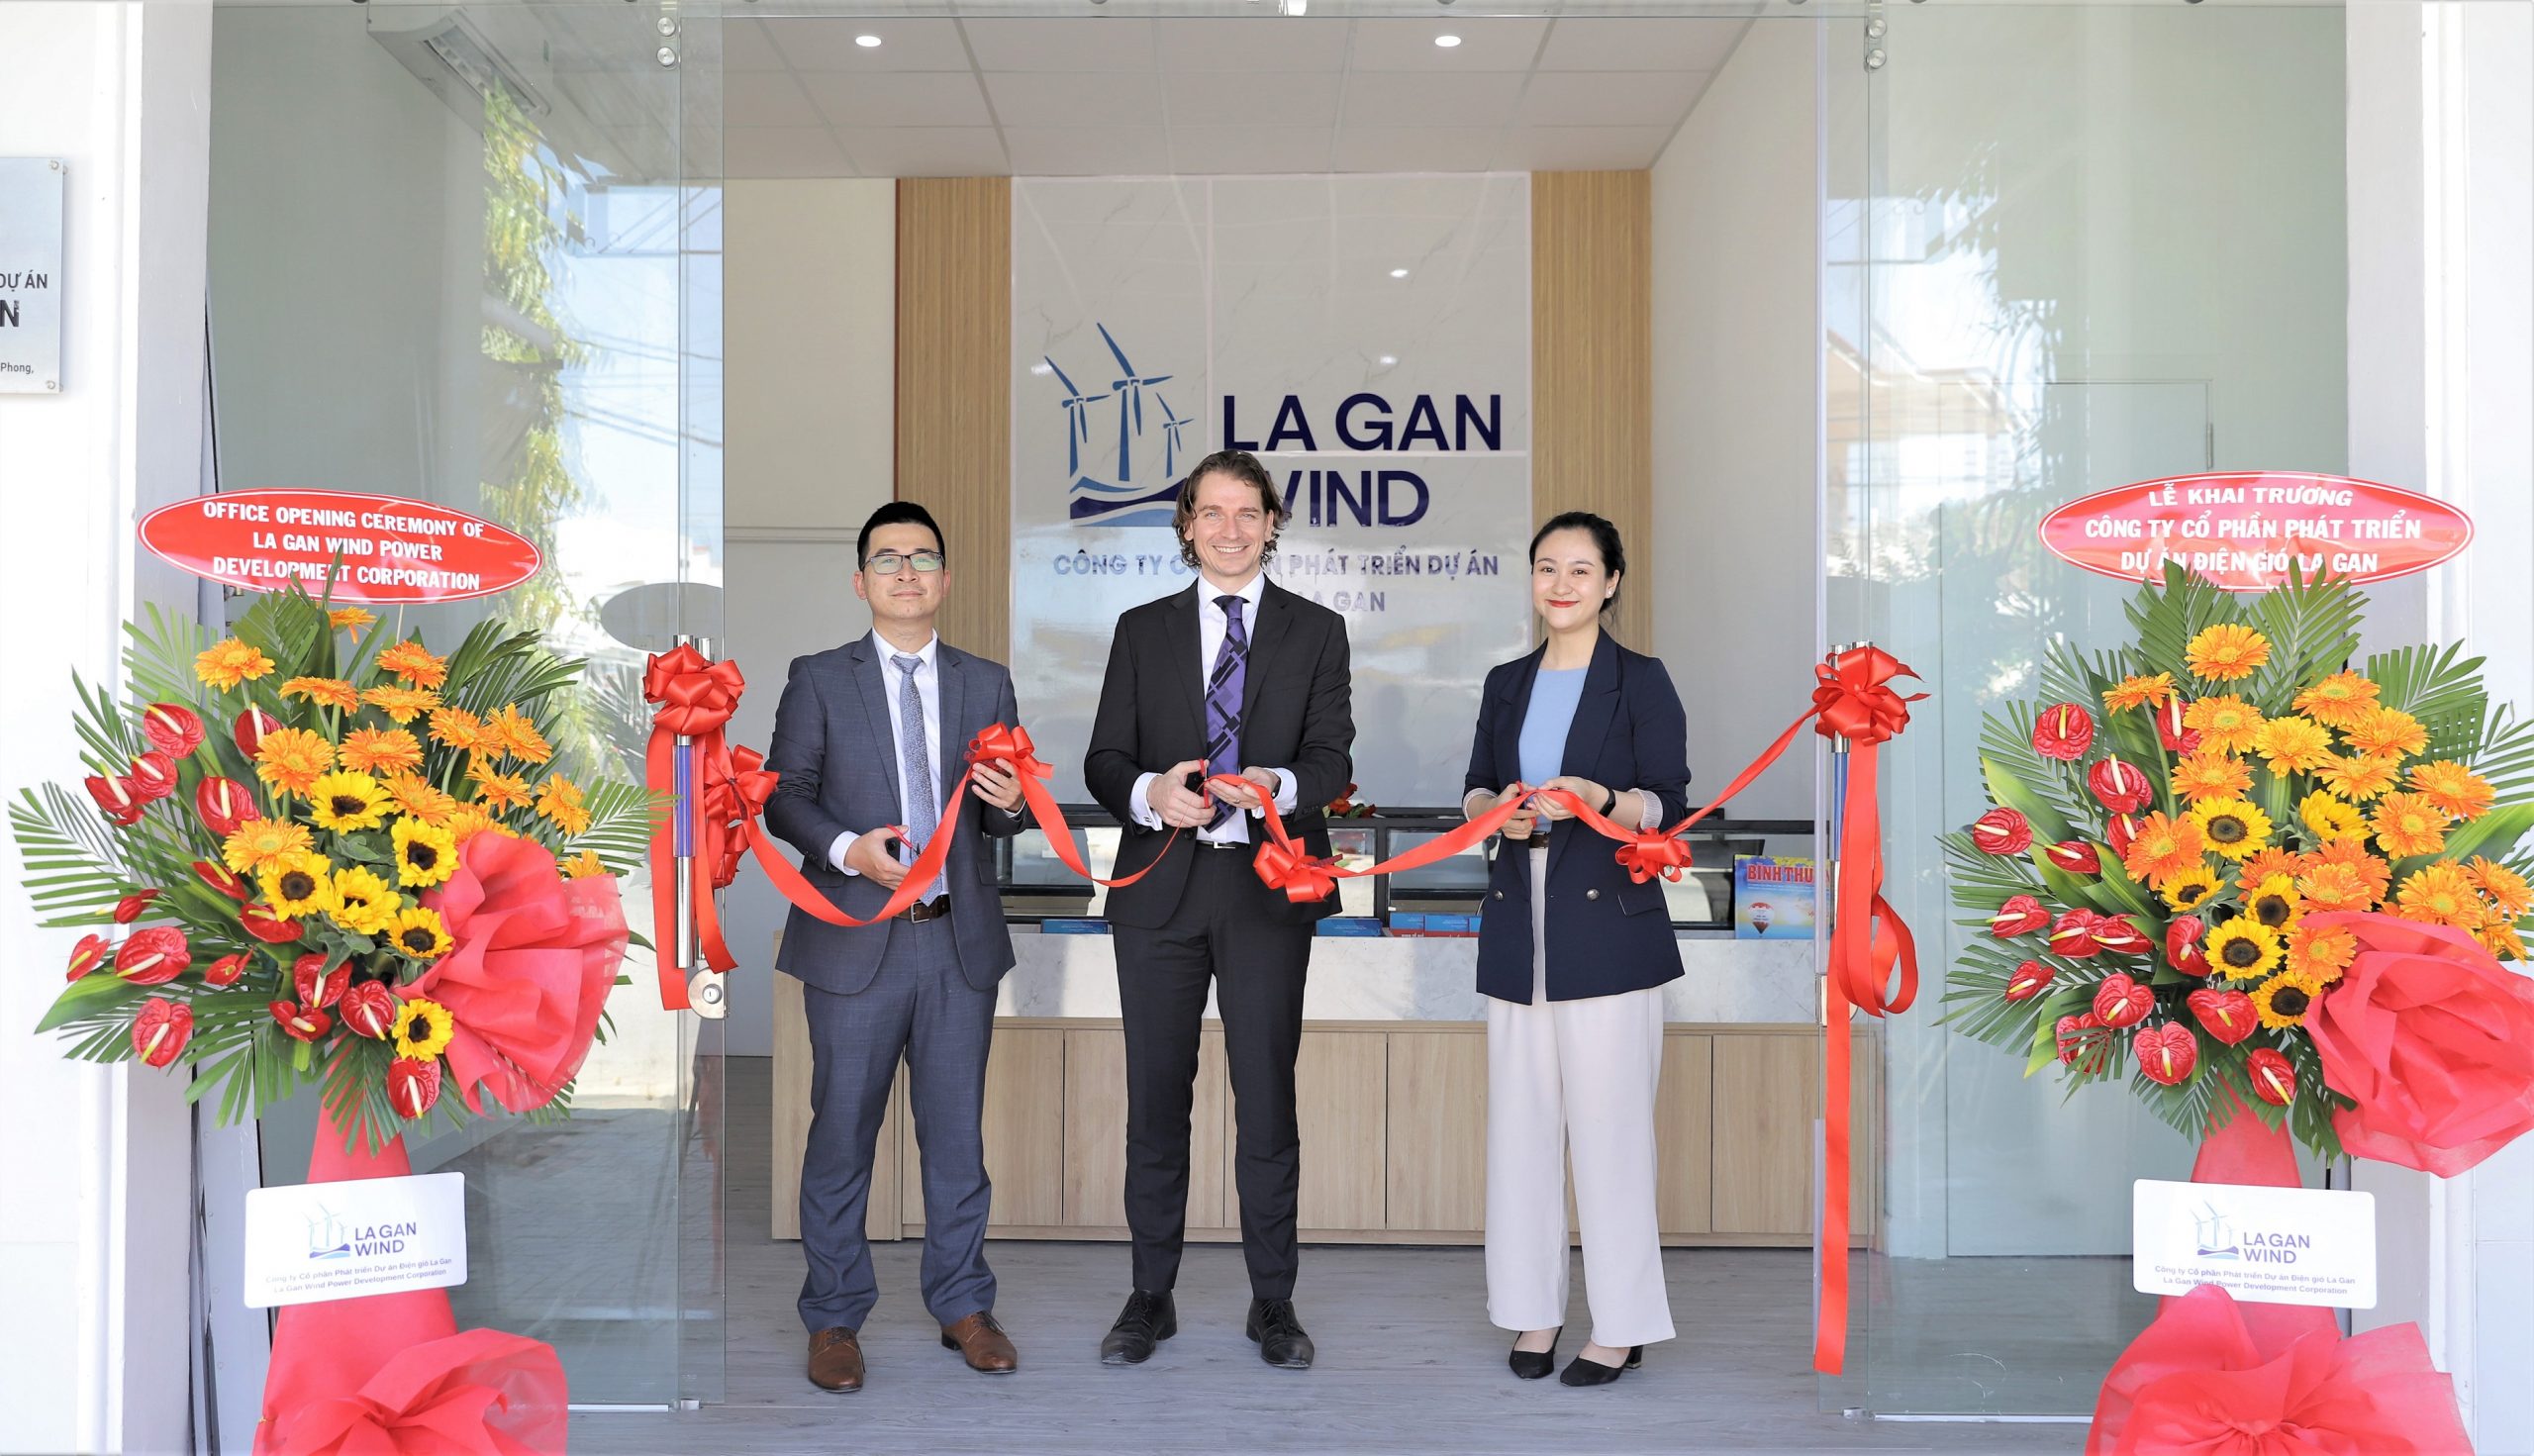 The head office of La Gan Wind Power Development Corporation was opened in Tuy Phong District, Binh Thuan province